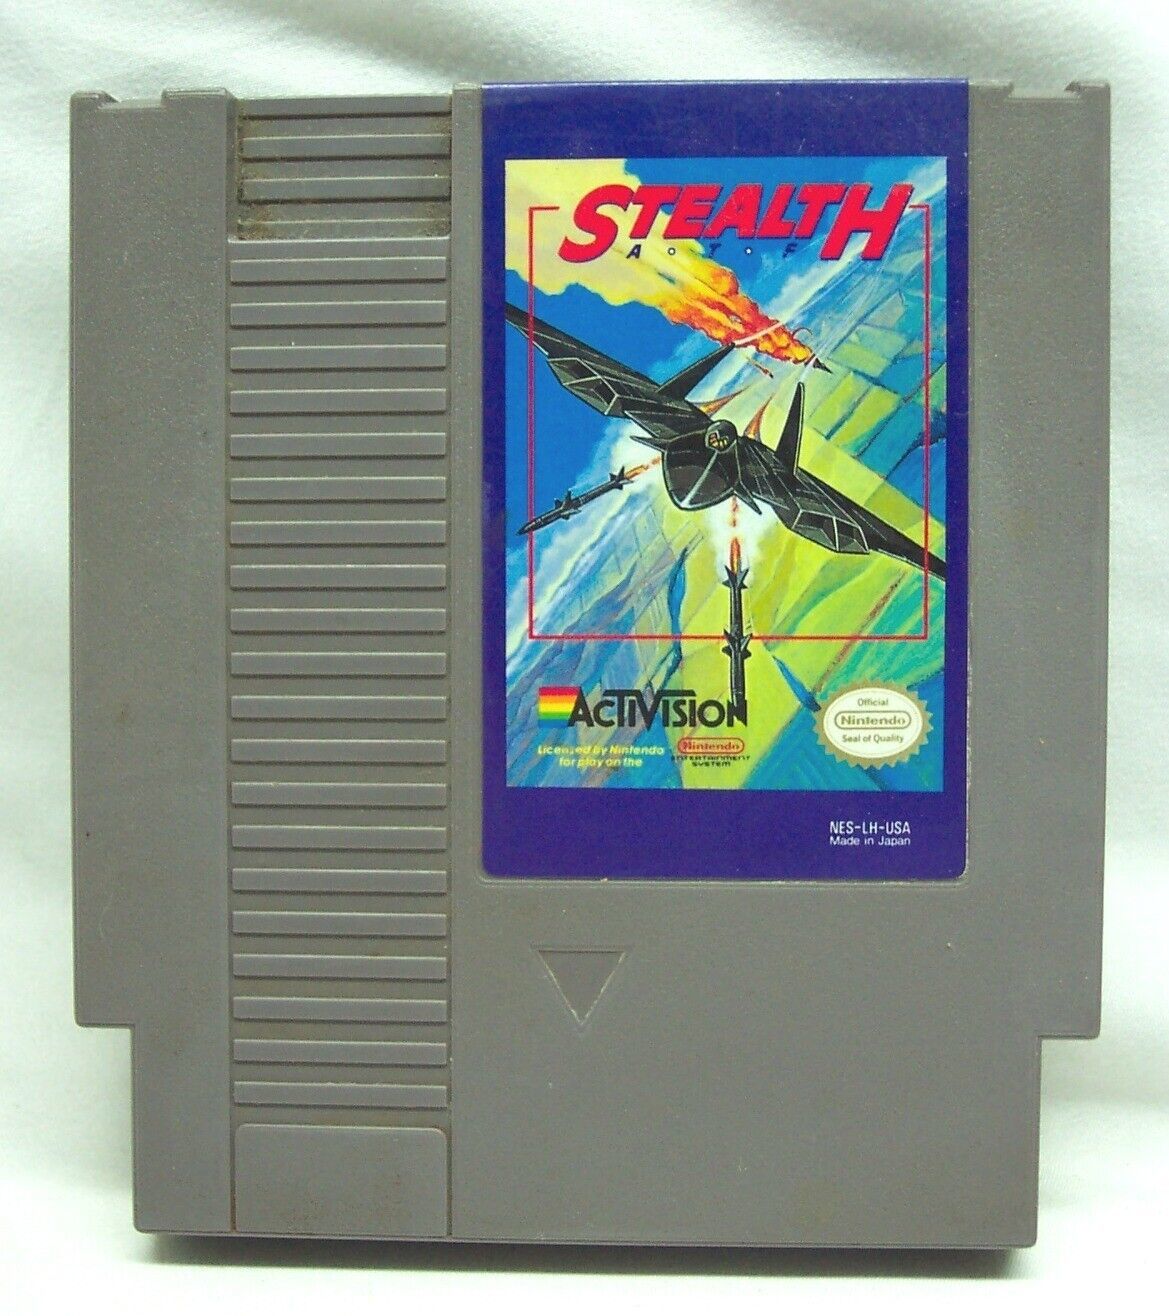 Vintage 1989 STEALTH ATF NES VIDEO GAME CART AUTHENTIC ORIGINAL TESTED - $16.34